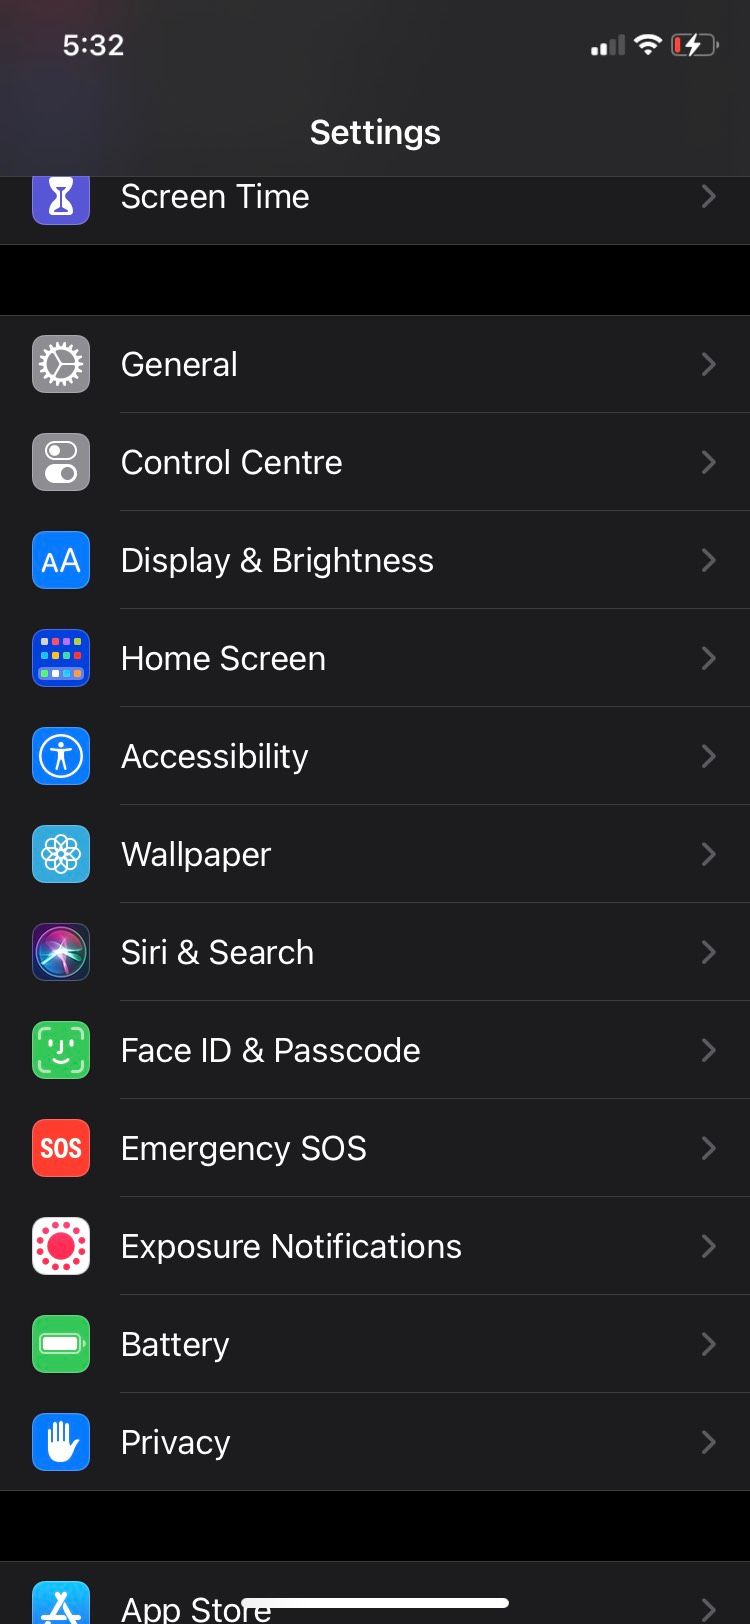 Siri and Search option in iPhone settings.